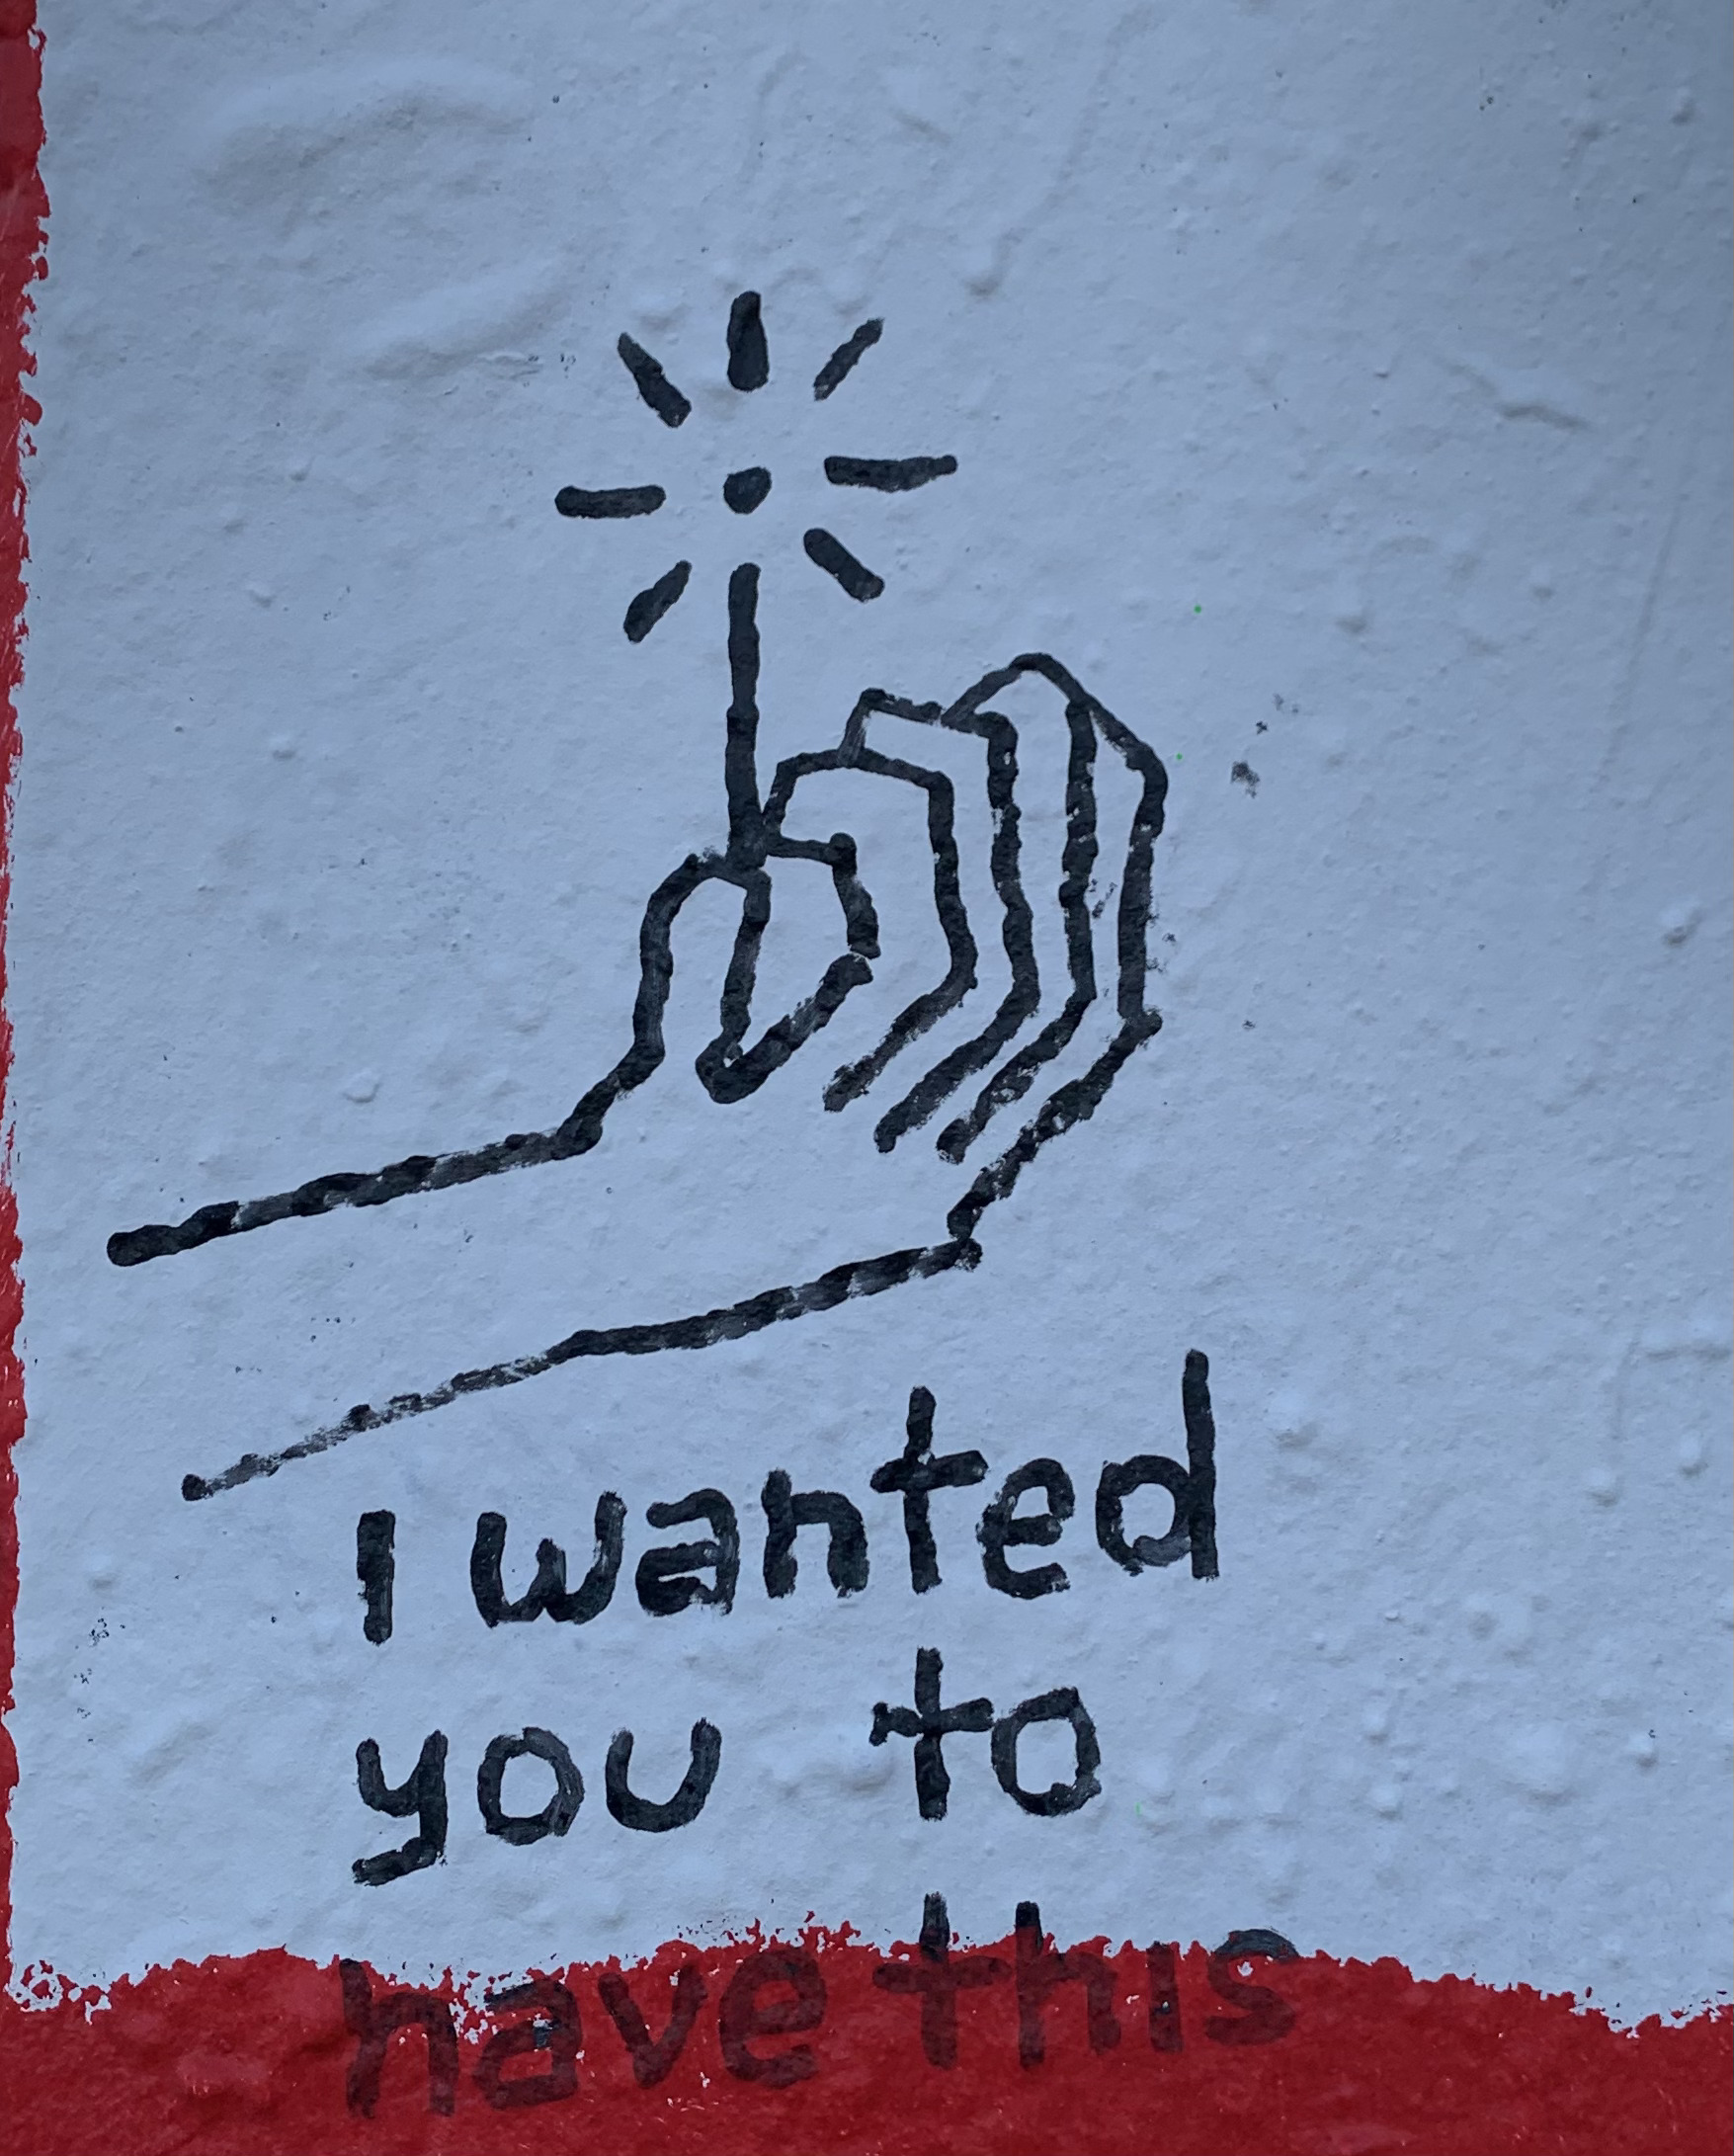 graffiti reading: i wanted you to have this